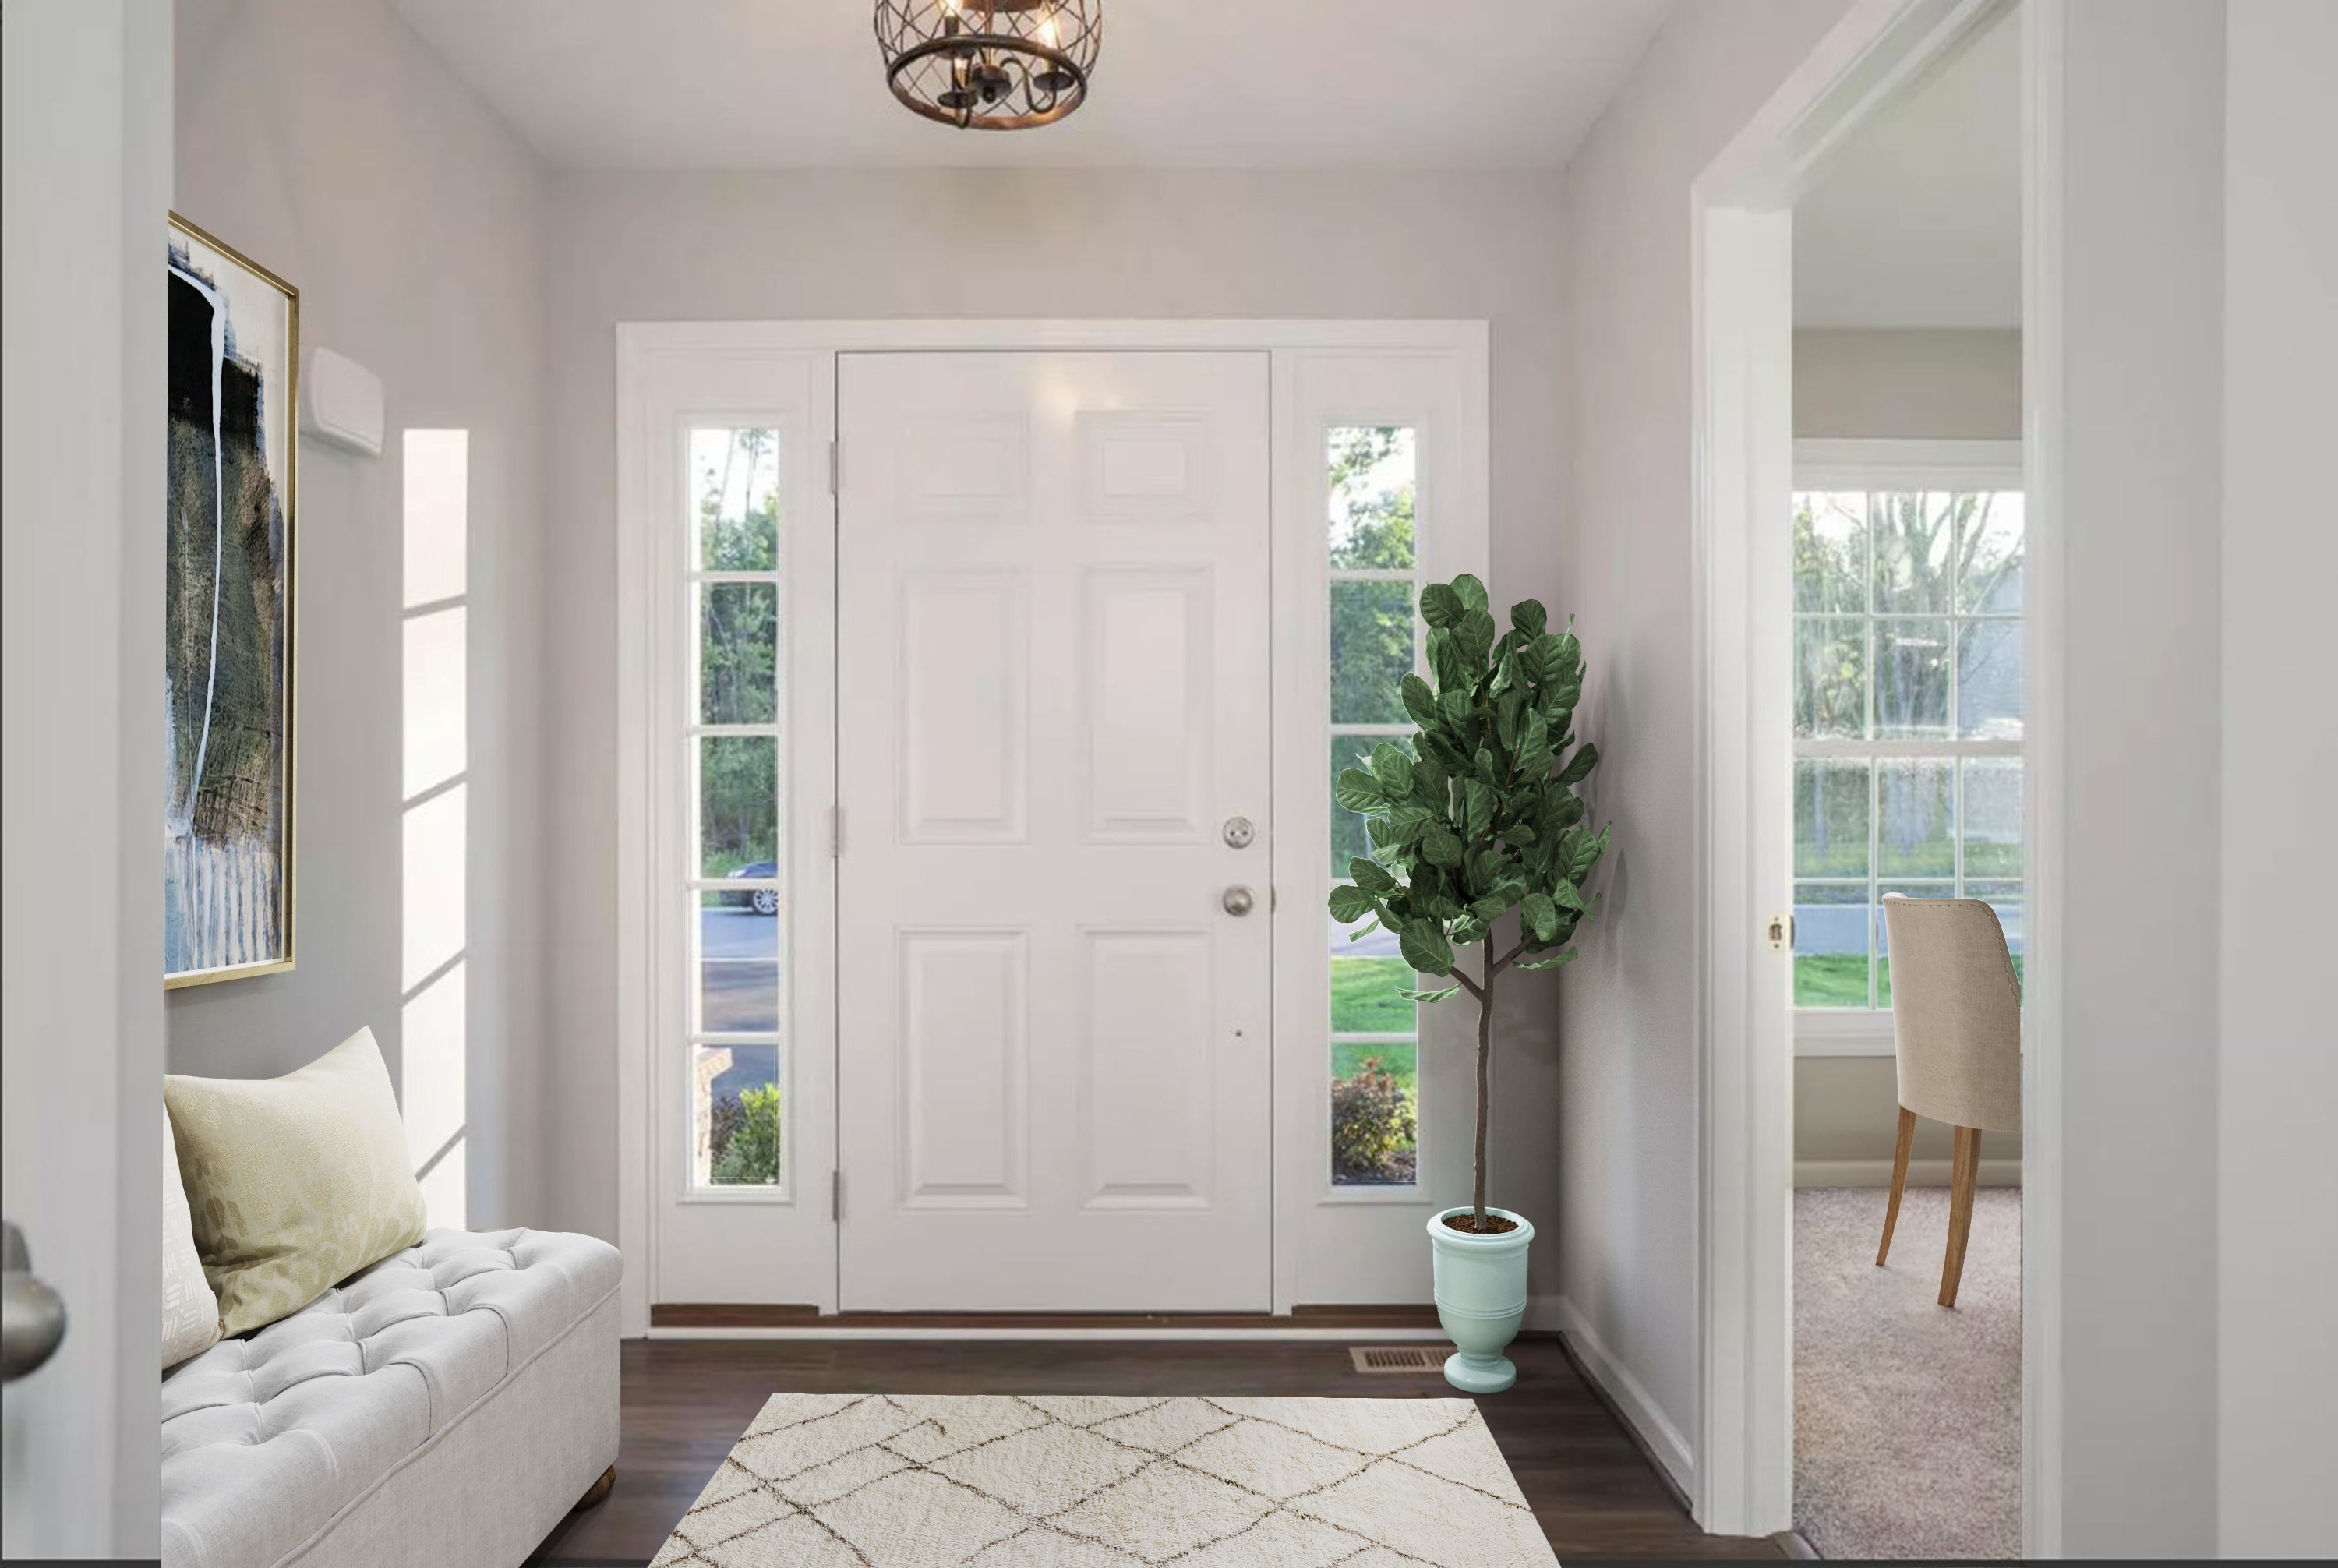 Photos of Foyers | New Homes in Buffalo and Western New York